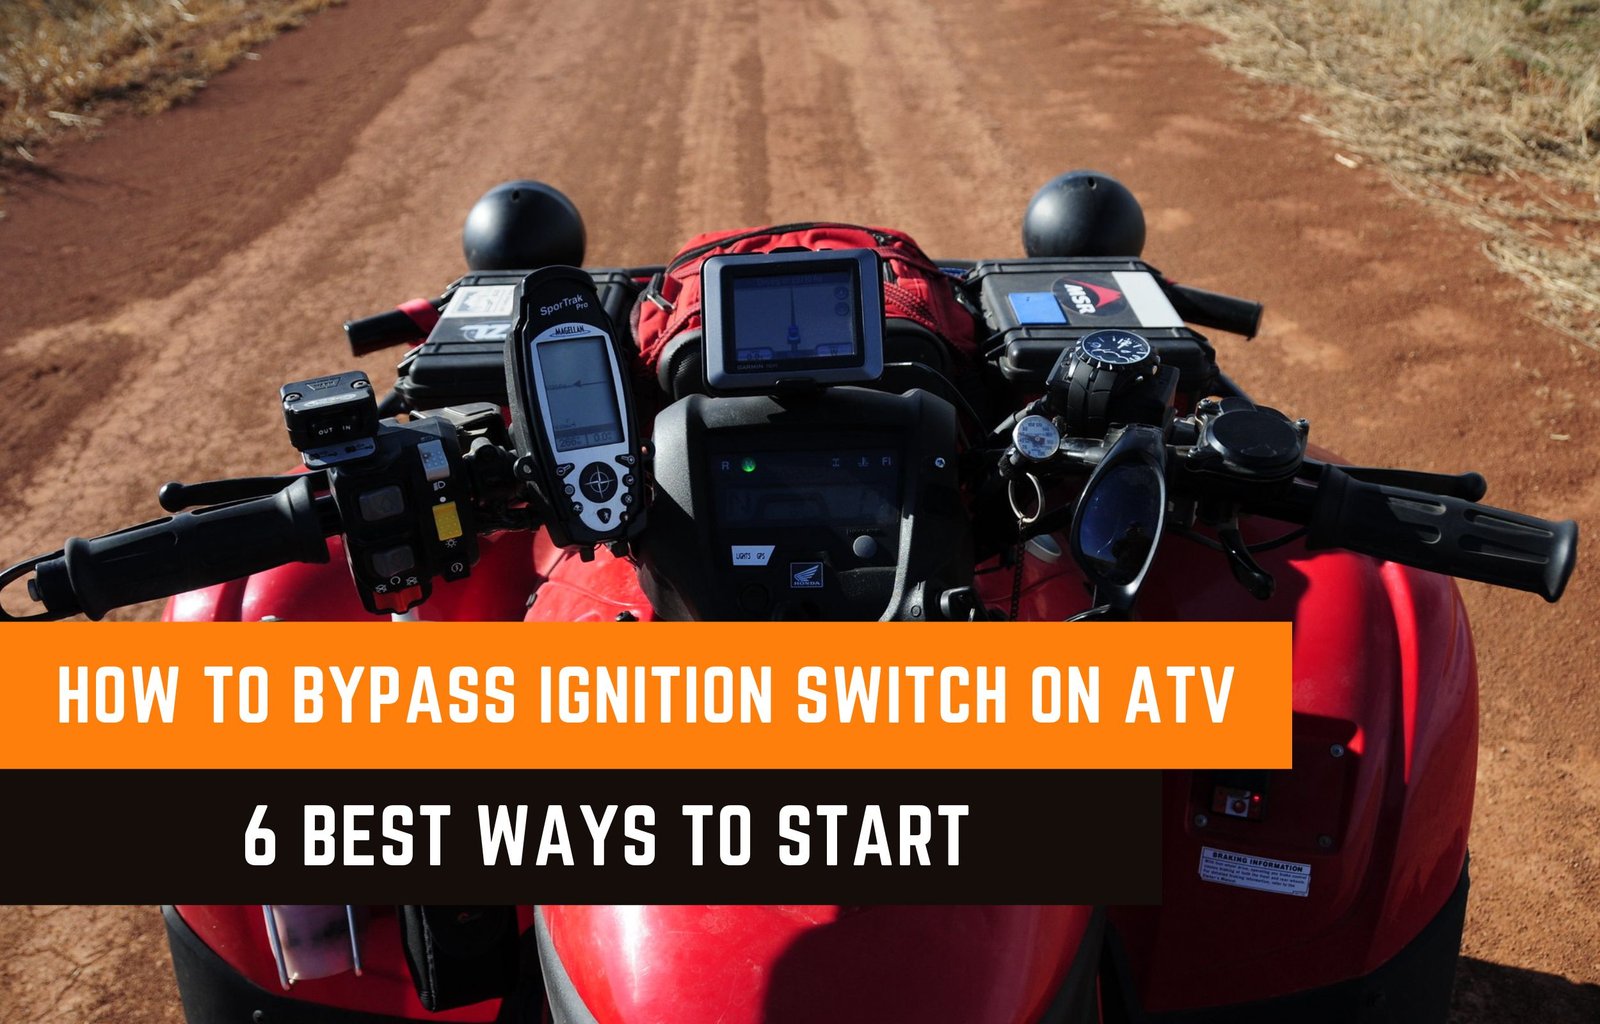 How To Bypass Ignition Switch On ATV